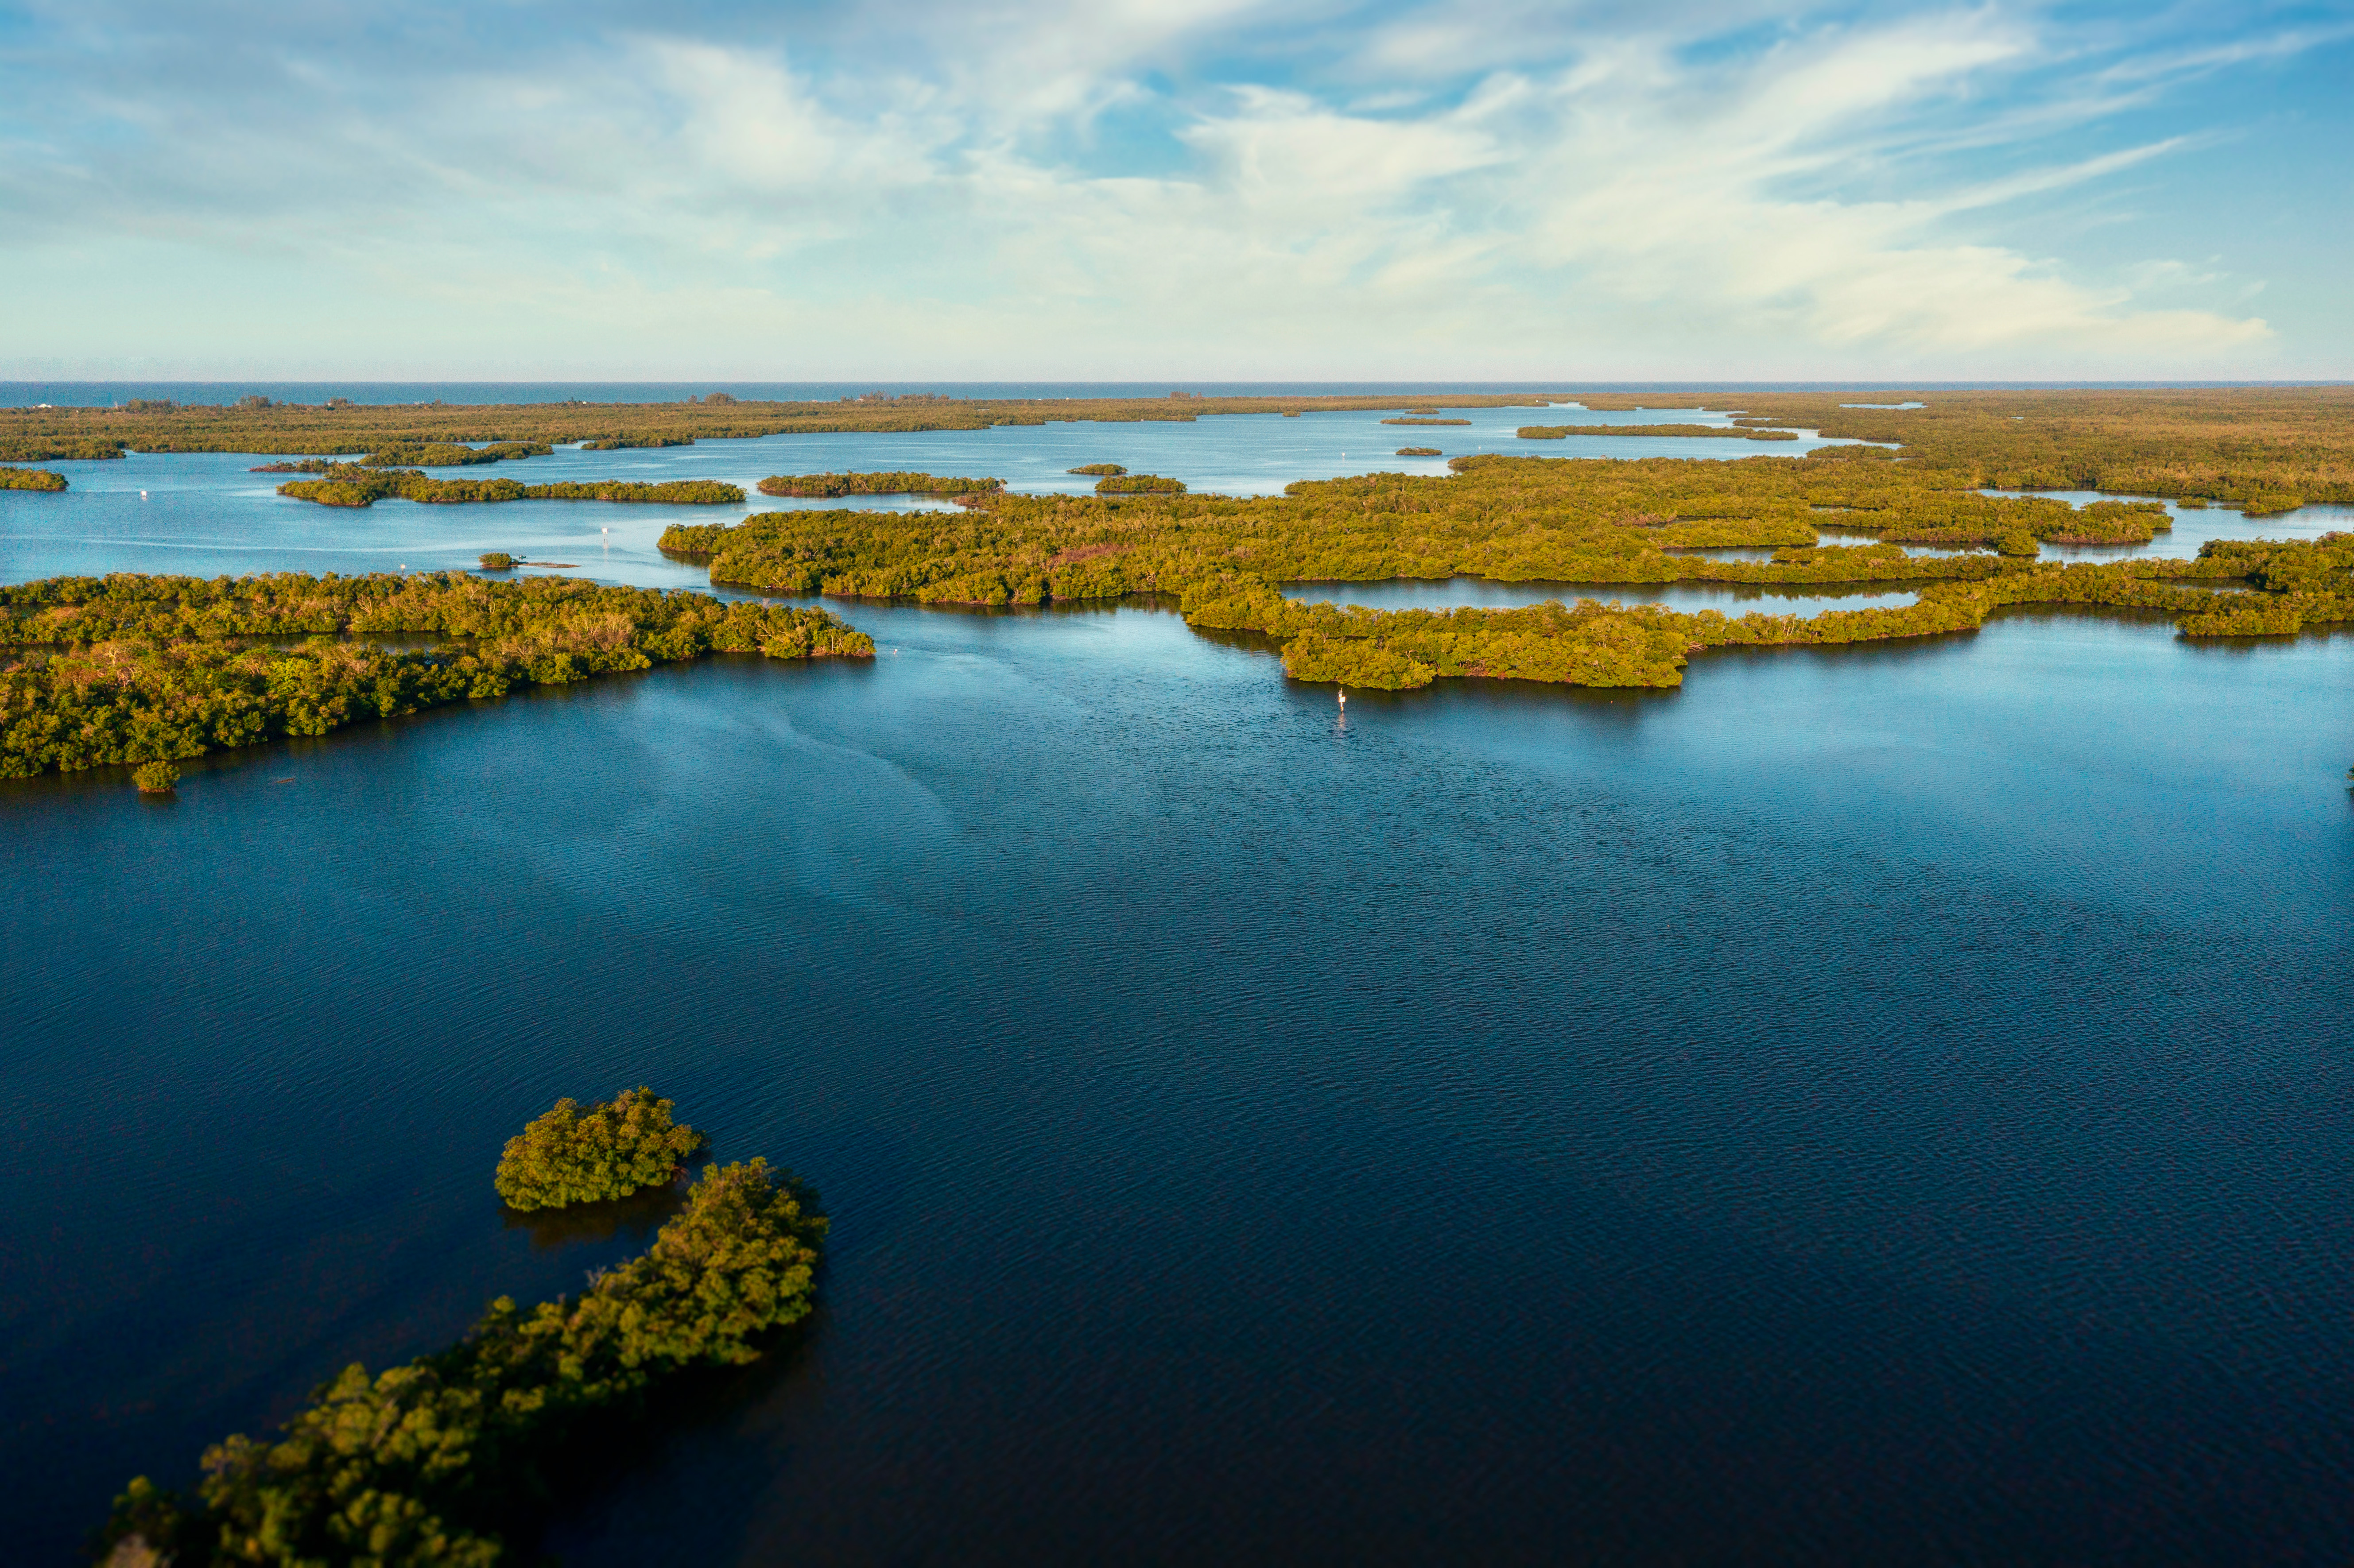 Aerial view of mangrove islands in Rookery Bay